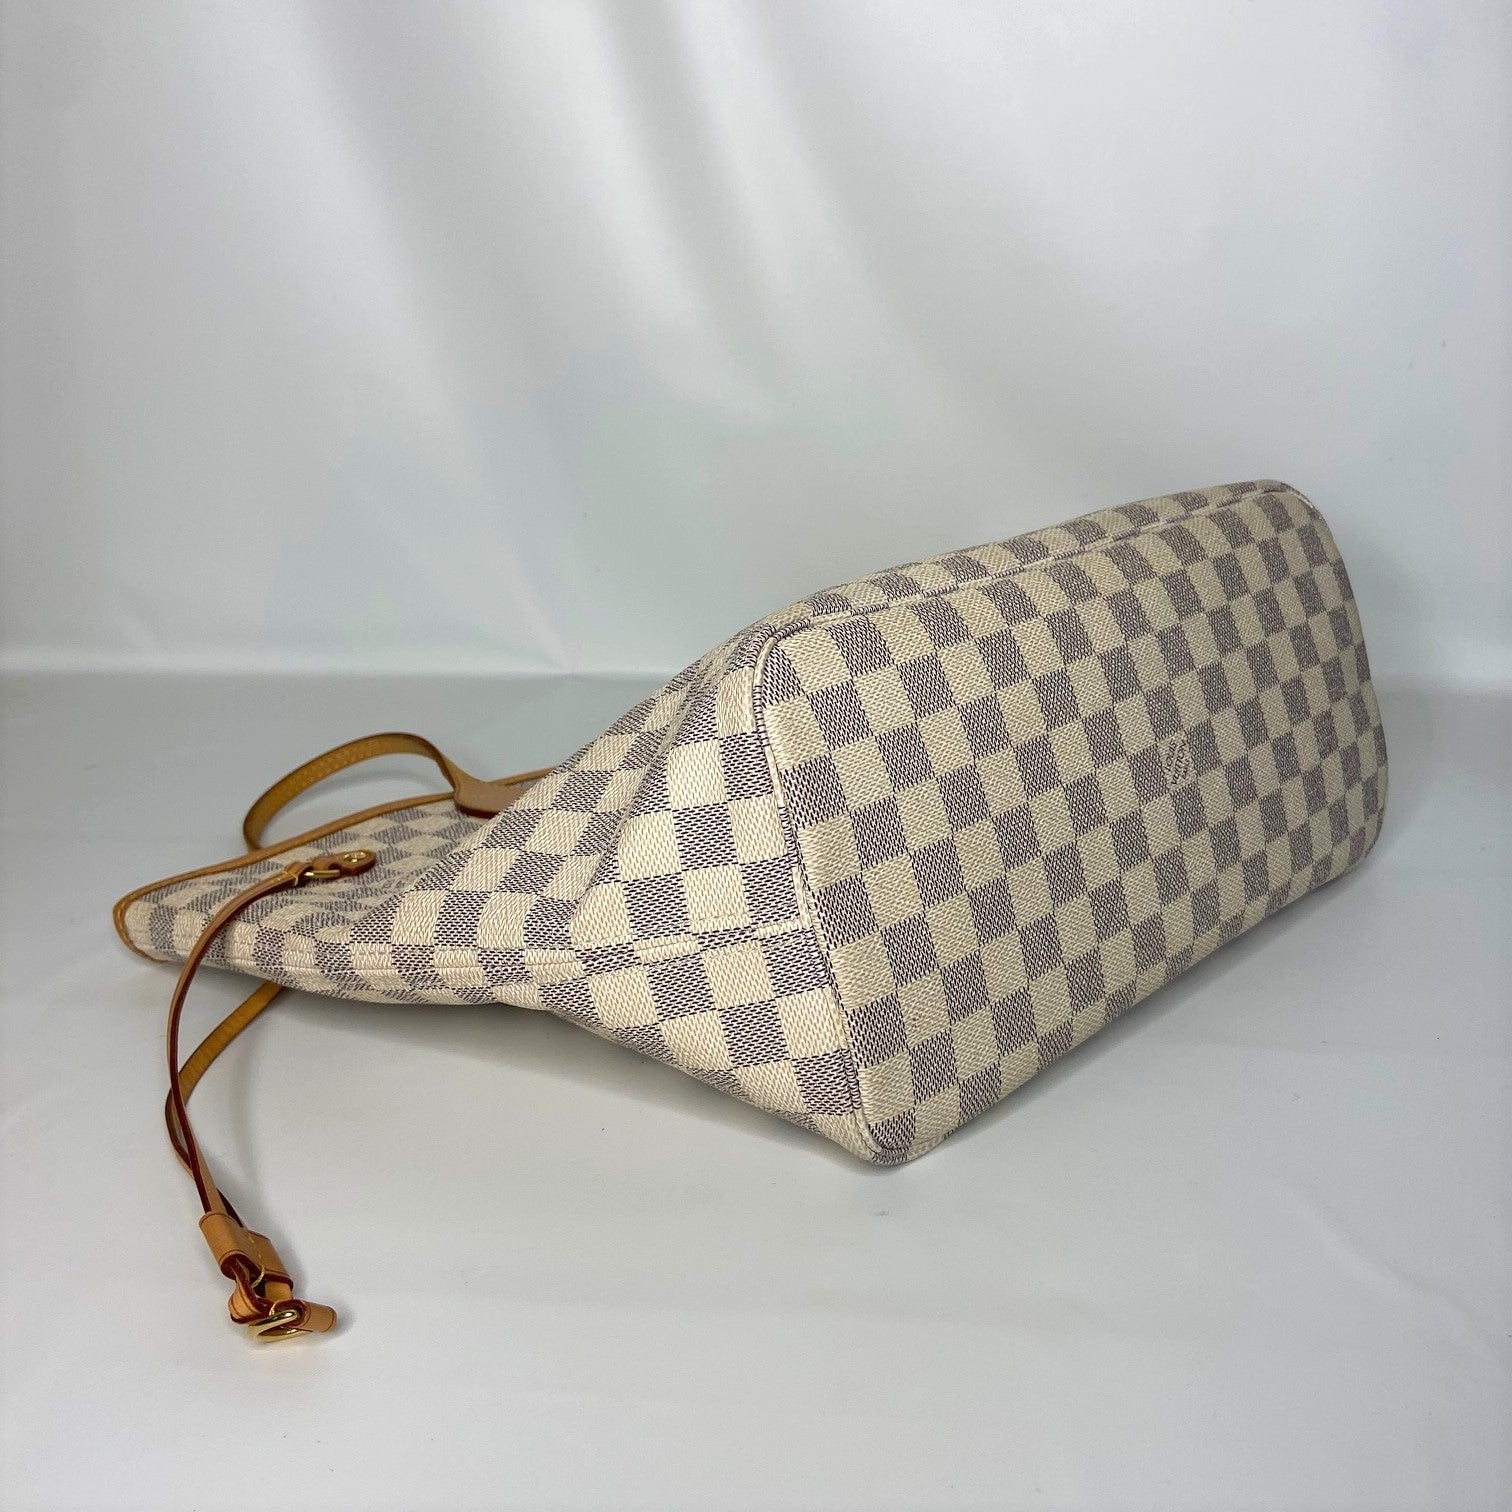 authentic louis-vuitton neverfull mm